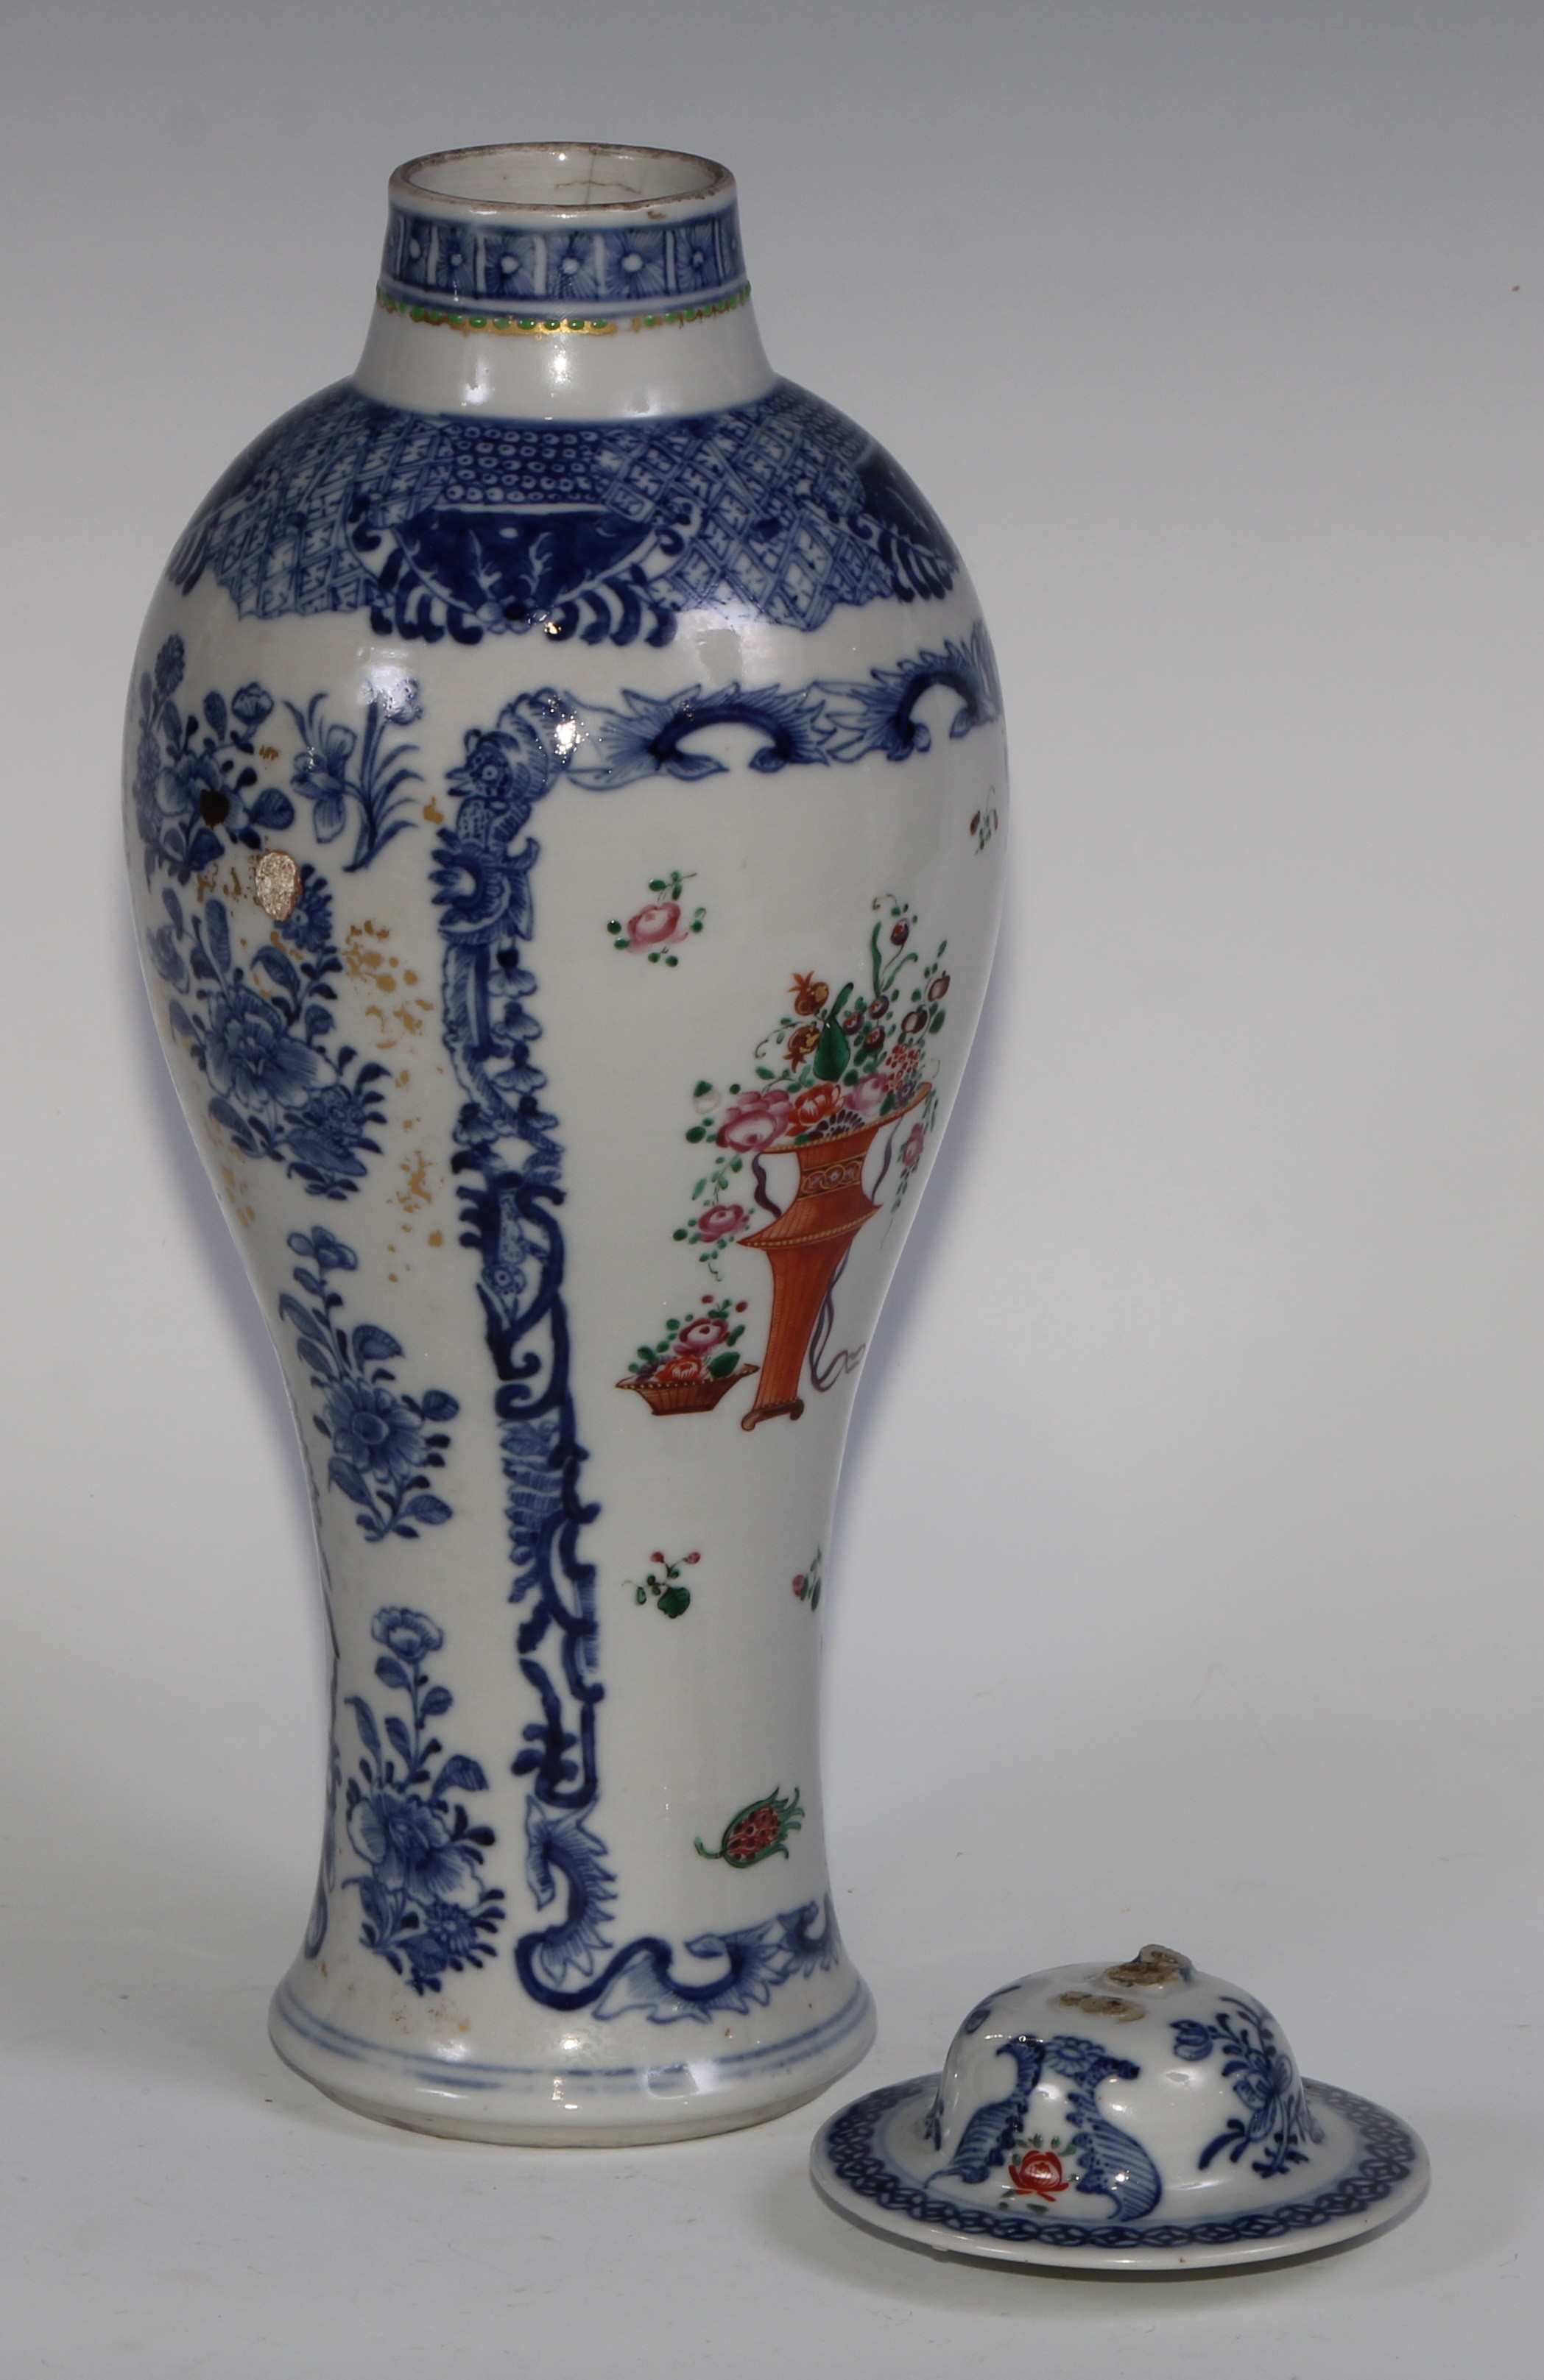 A pair of Chinese baluster vases and covers, painted in the Mandarin palette with vases of flowers - Image 11 of 14